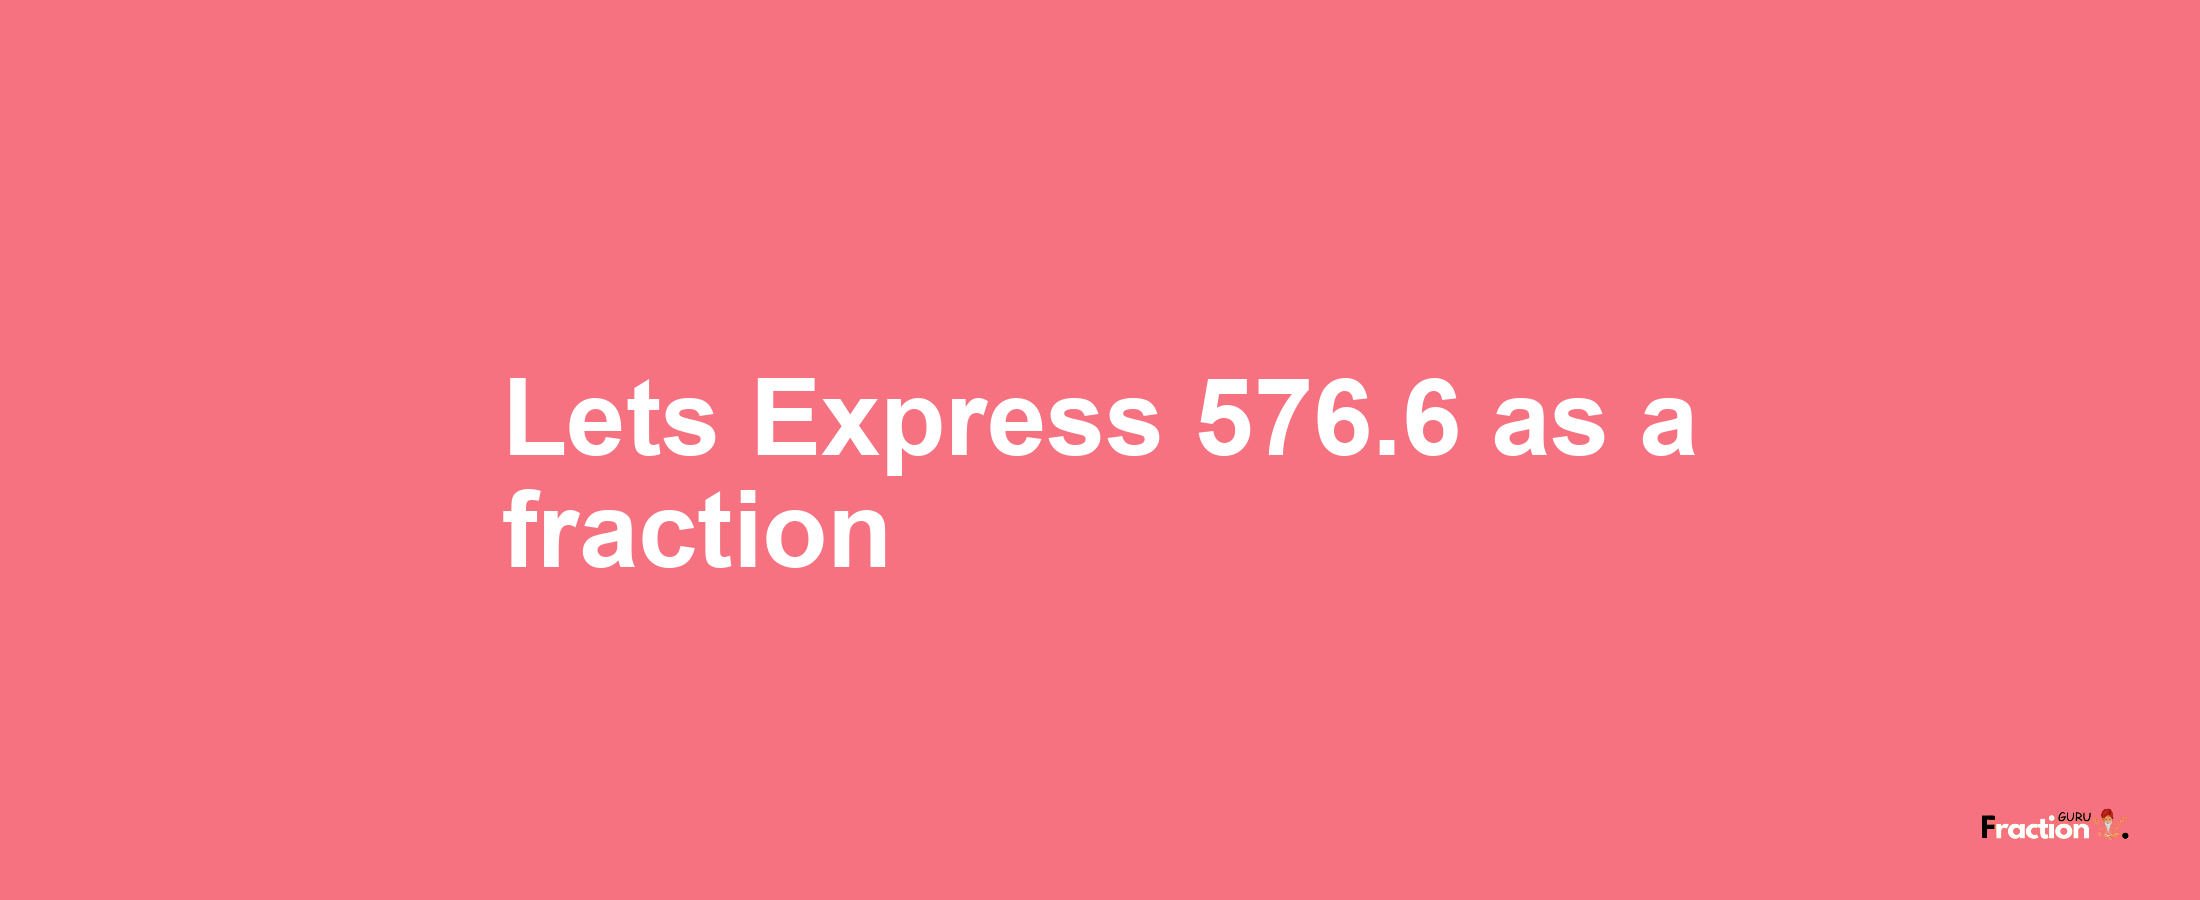 Lets Express 576.6 as afraction